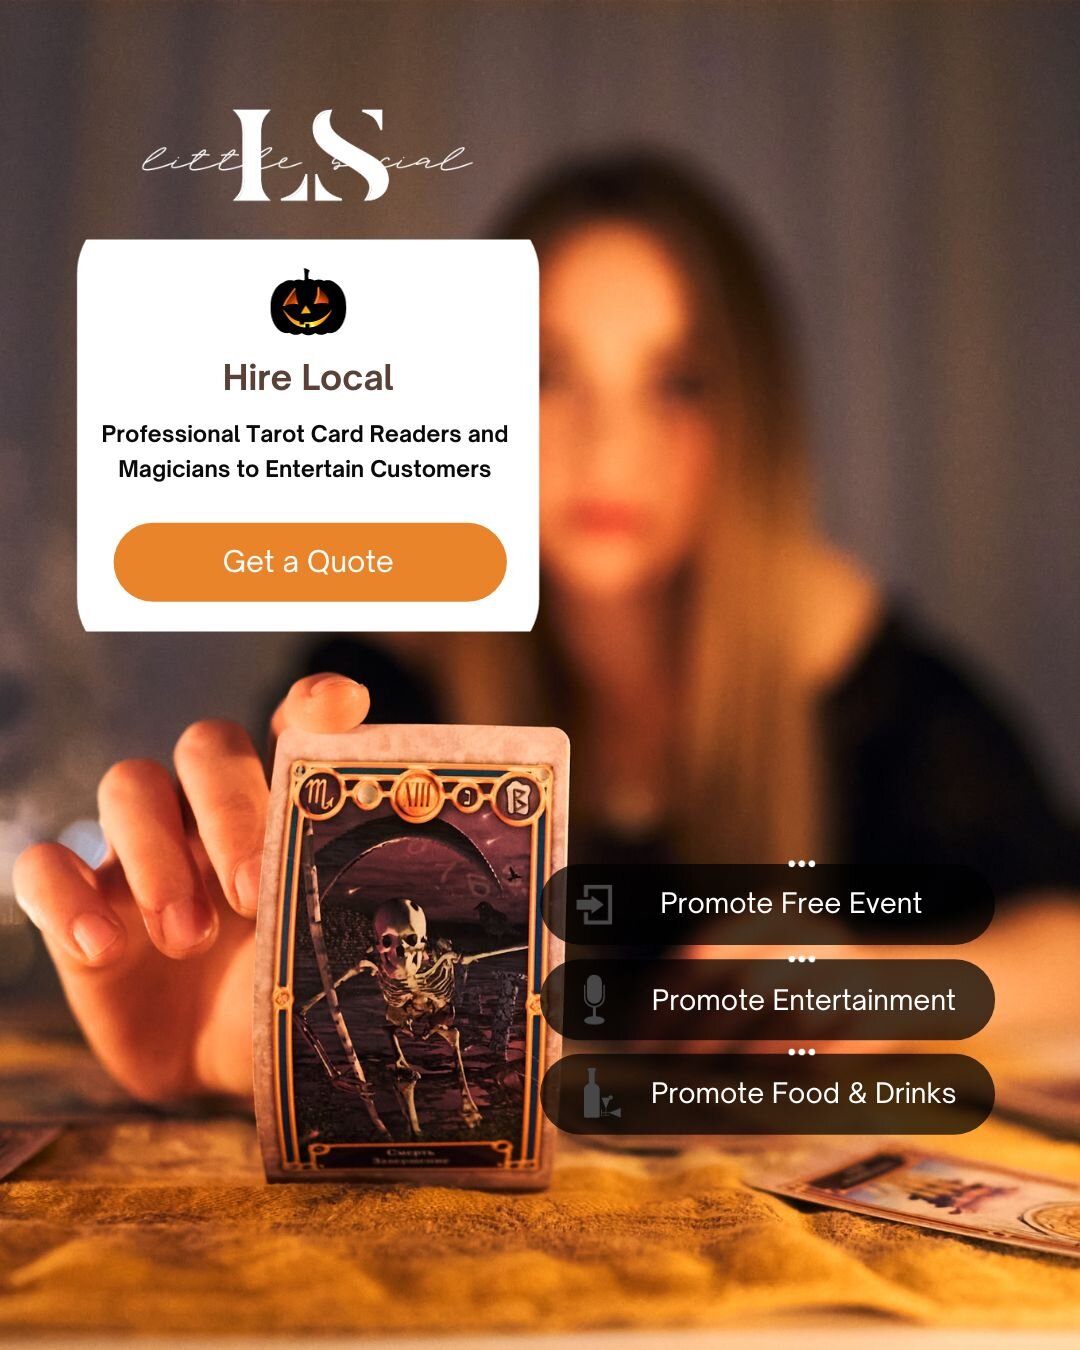 This Halloween hire a magician or fortune teller to wow your customers! Check out local pros who are experts at creating mystery and illusion. 🔮🧙&zwj;♀️
Don't forget to promote across all social channels! 
Let your customers know if your entertainm